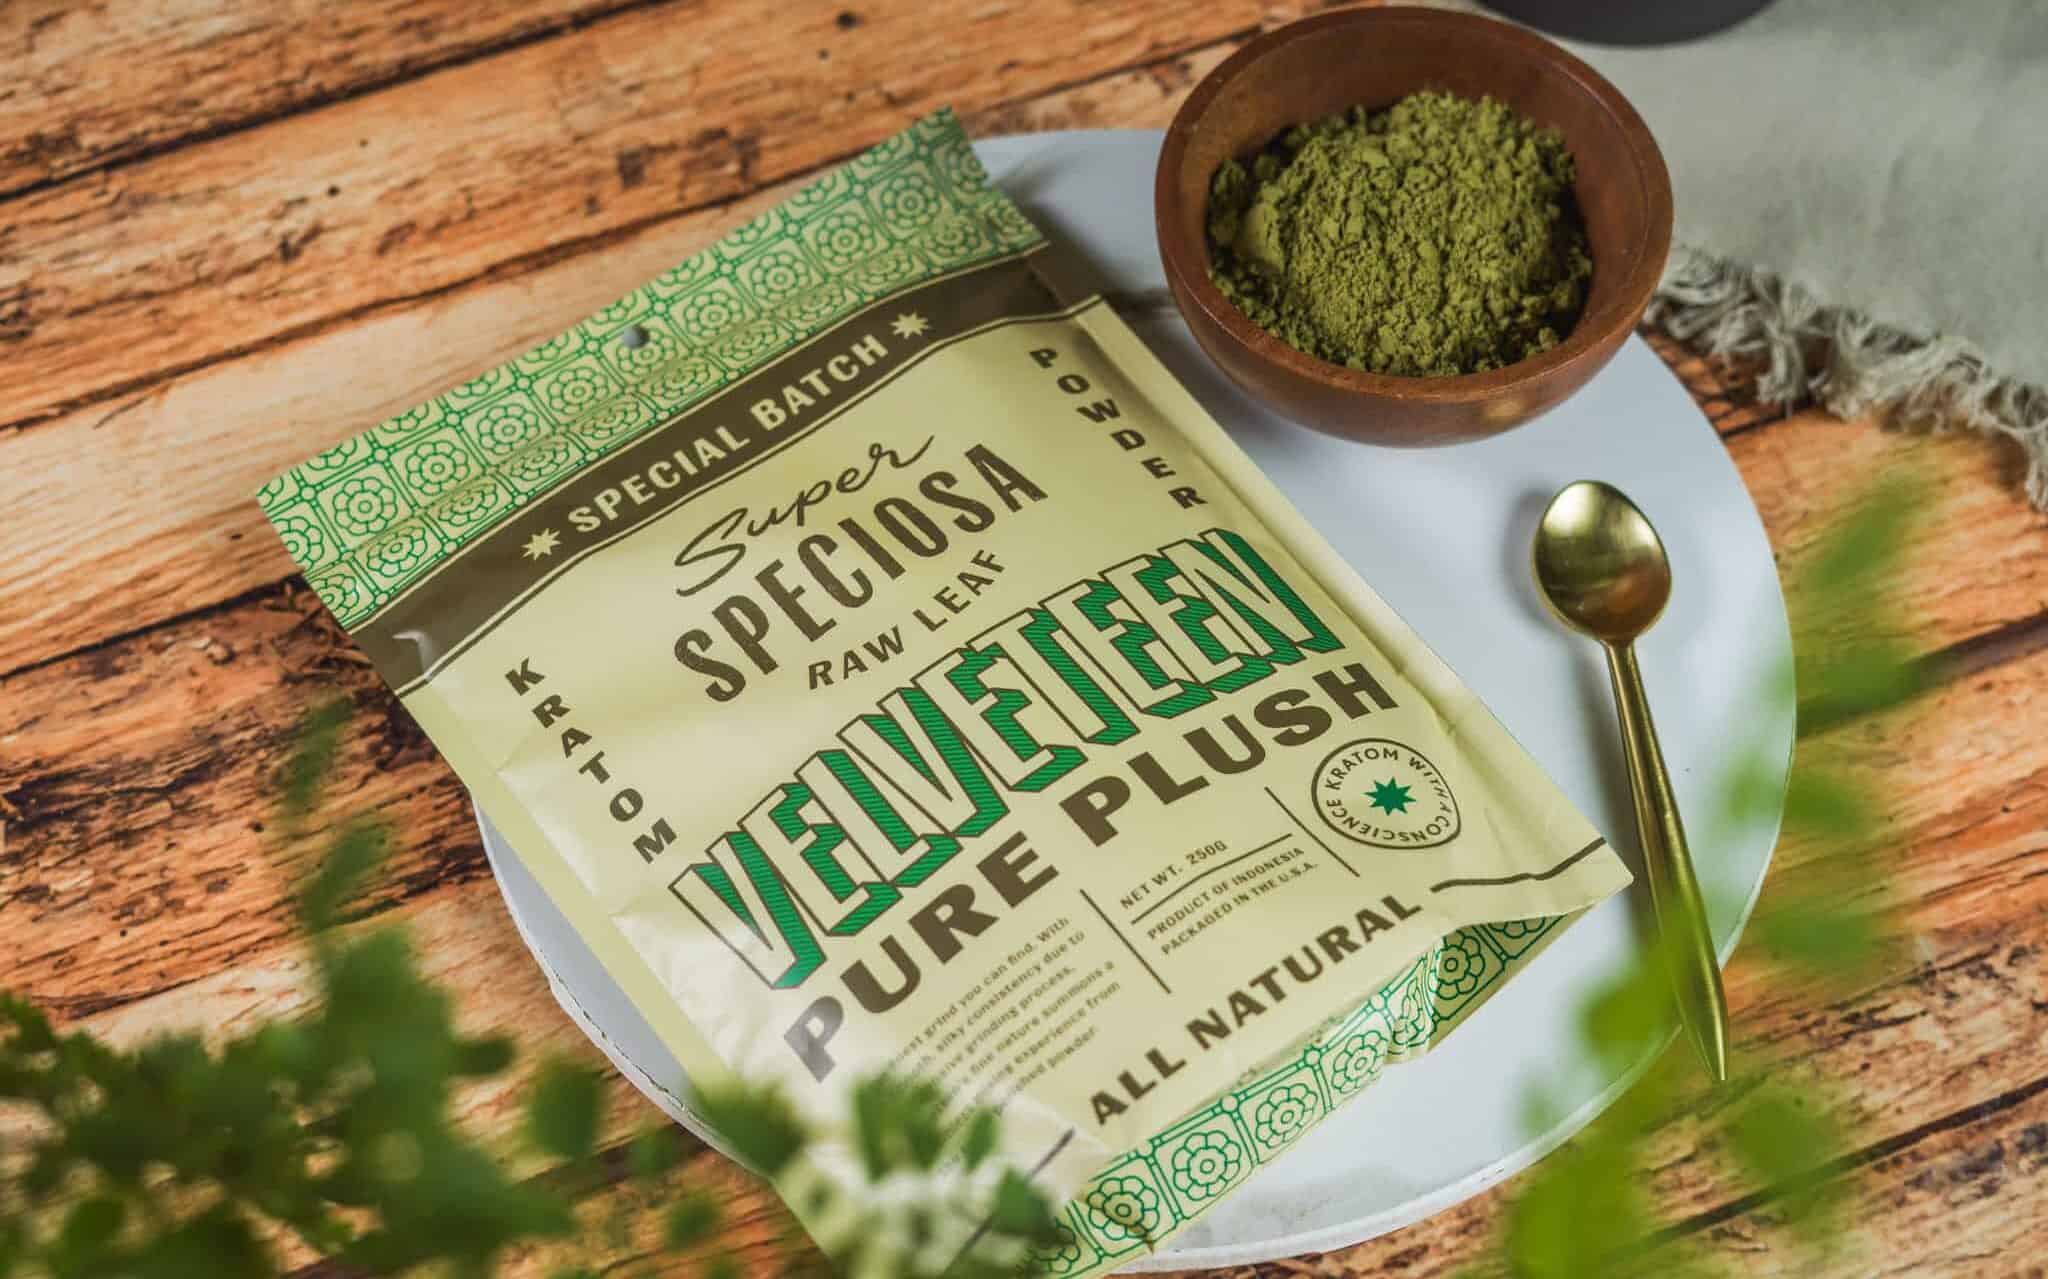 Super Speciosa Velveteen Nano Kratom styled with greenery and a bowl of kratom powder and spoon.